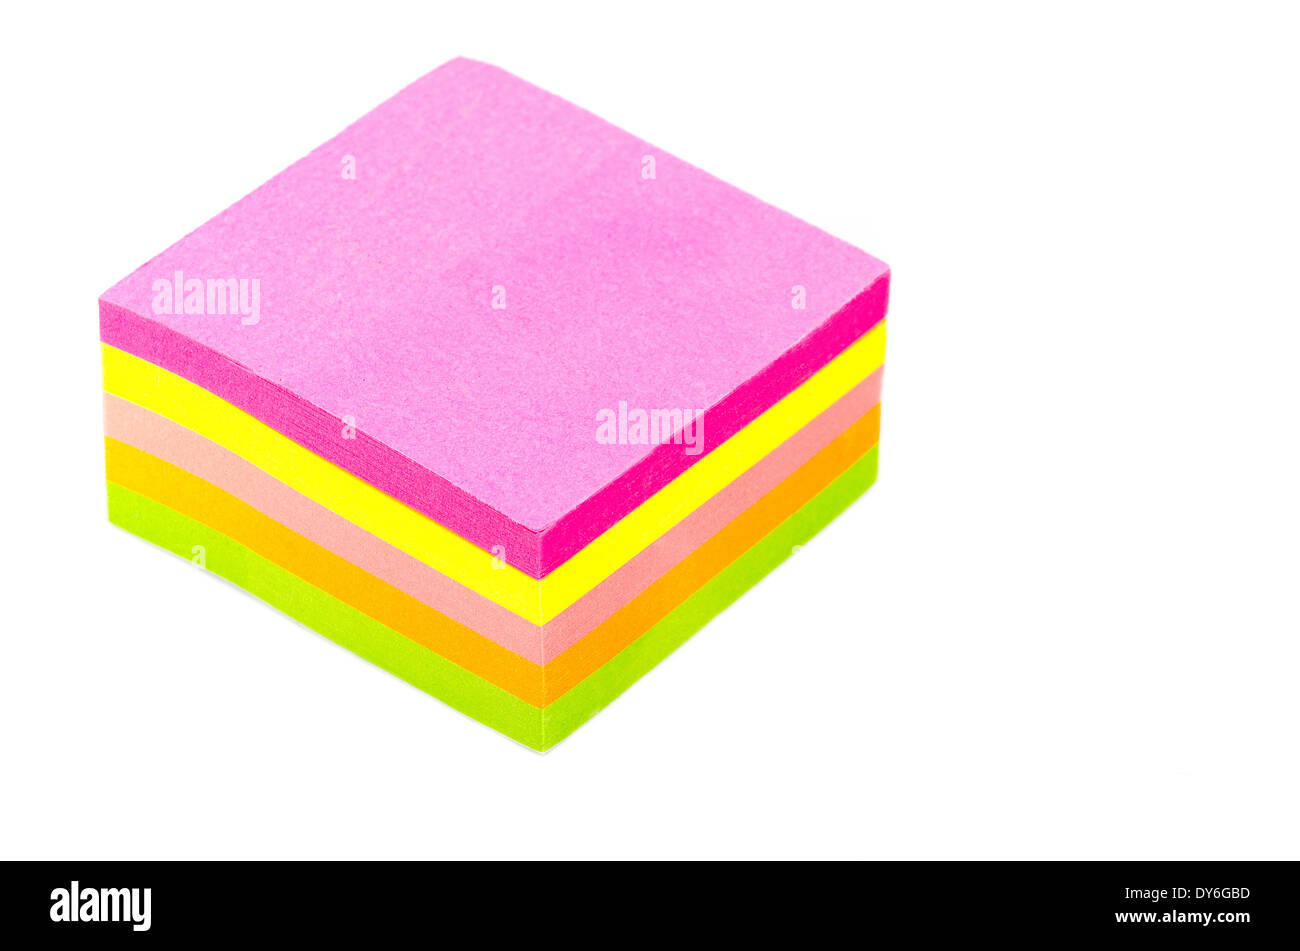 Stack of sticky post-it note pads, some bright, some pastel isolated on white background Stock Photo